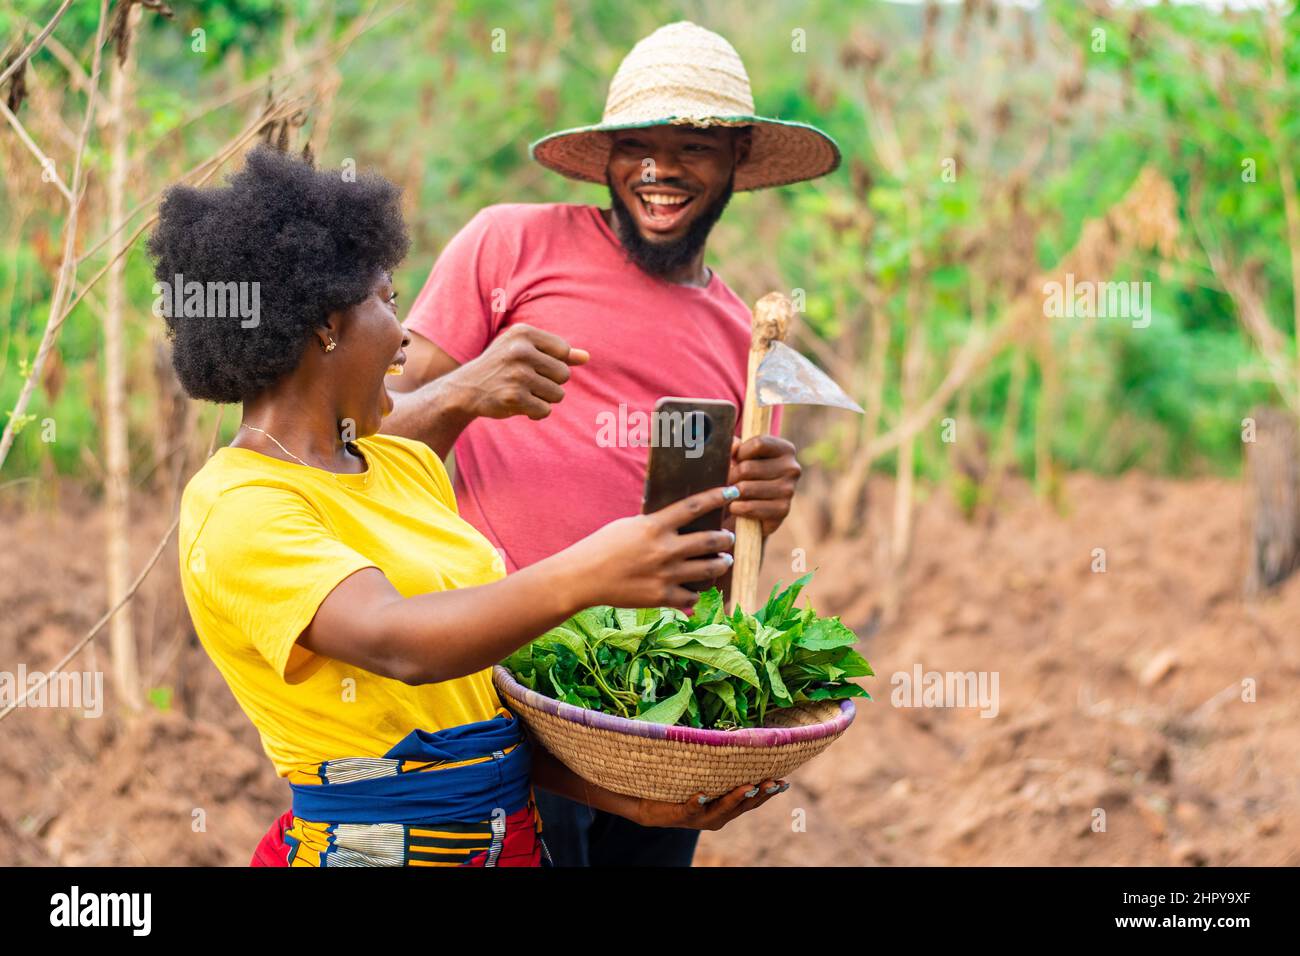 An African couple doing selfie while carrying basket of vegetable Stock Photo